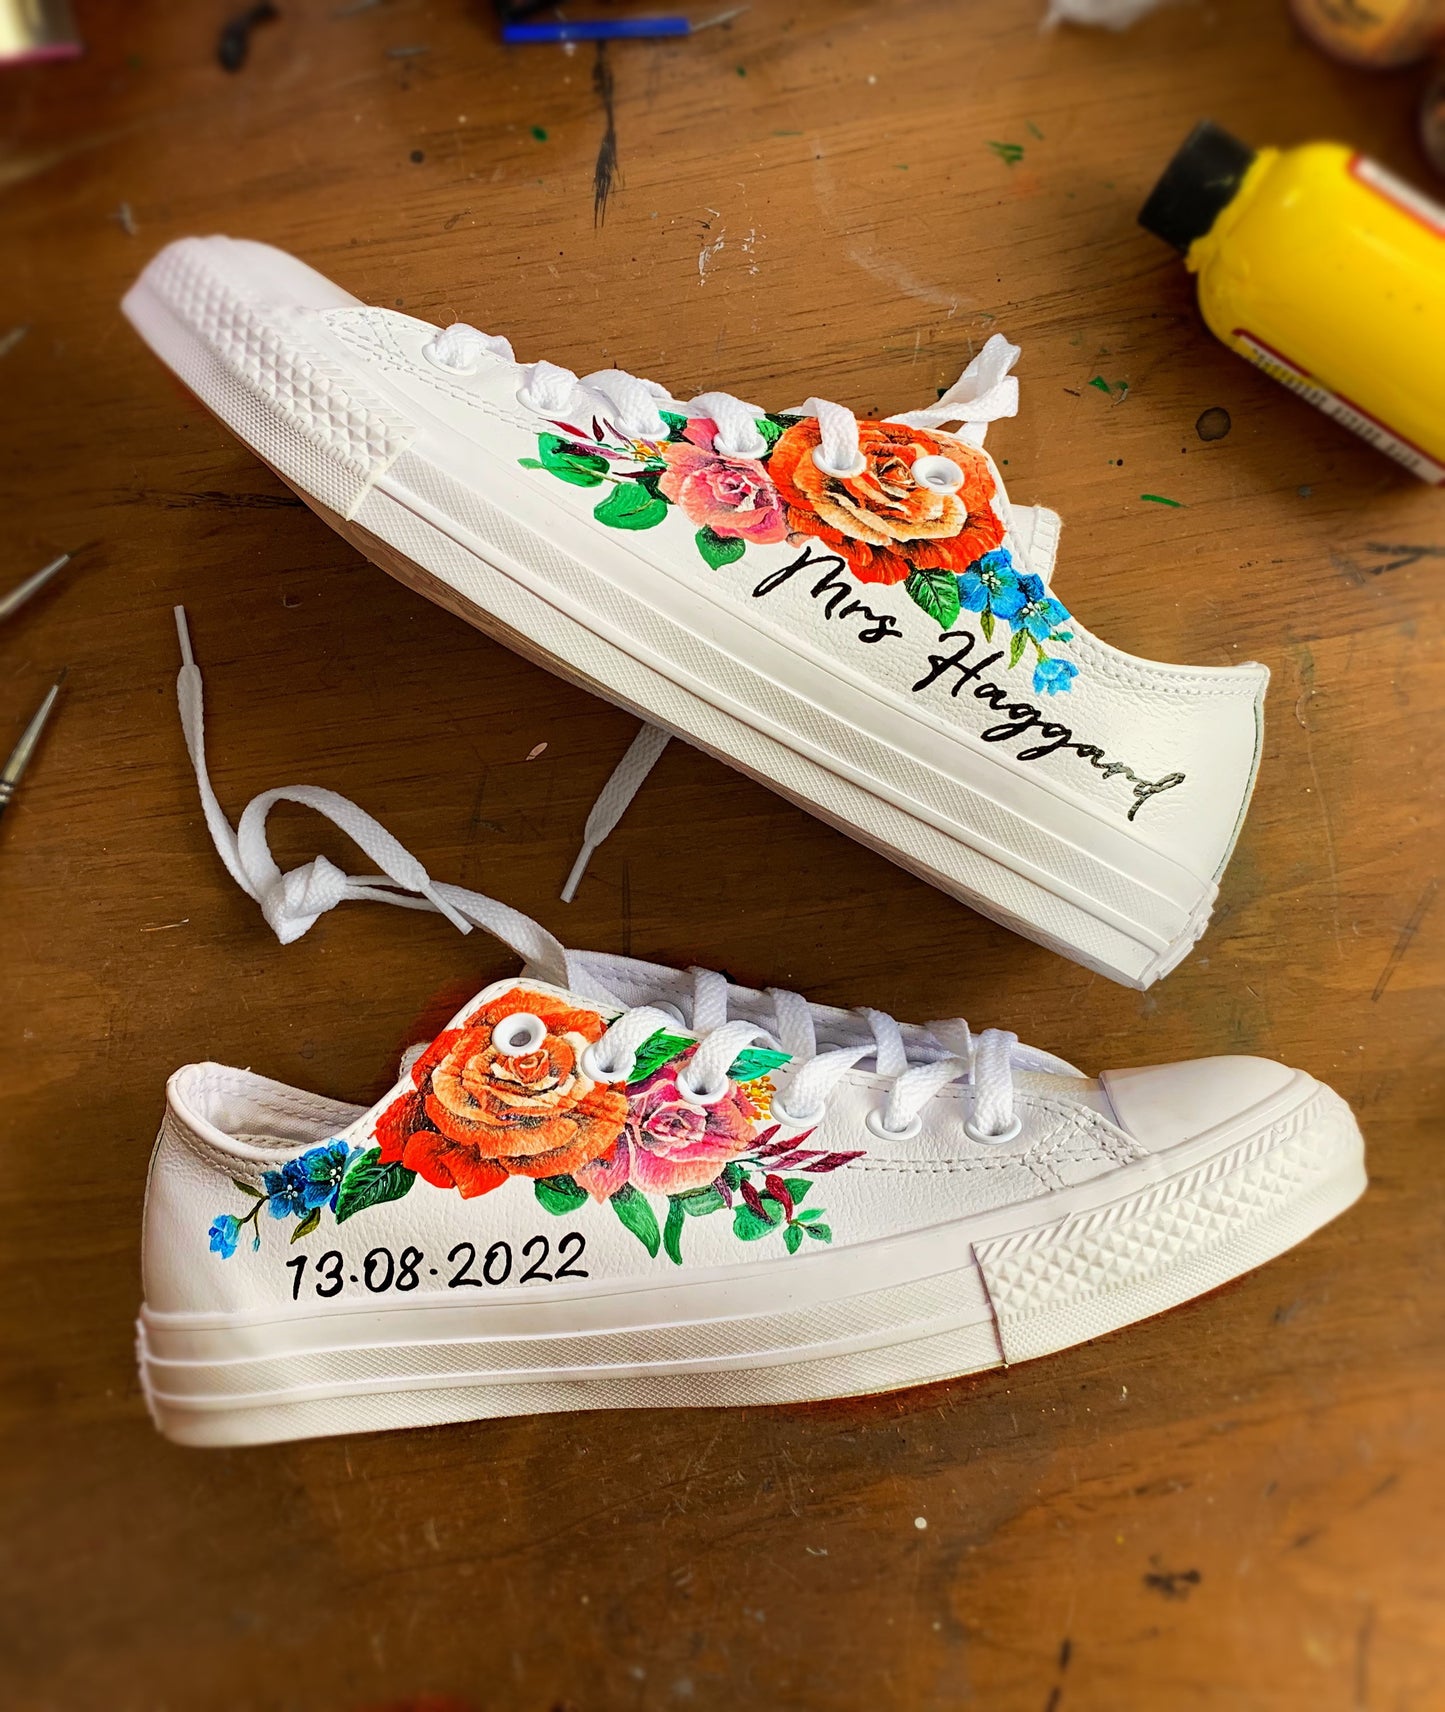 Wedding converse, personalised hand painted wedding shoes